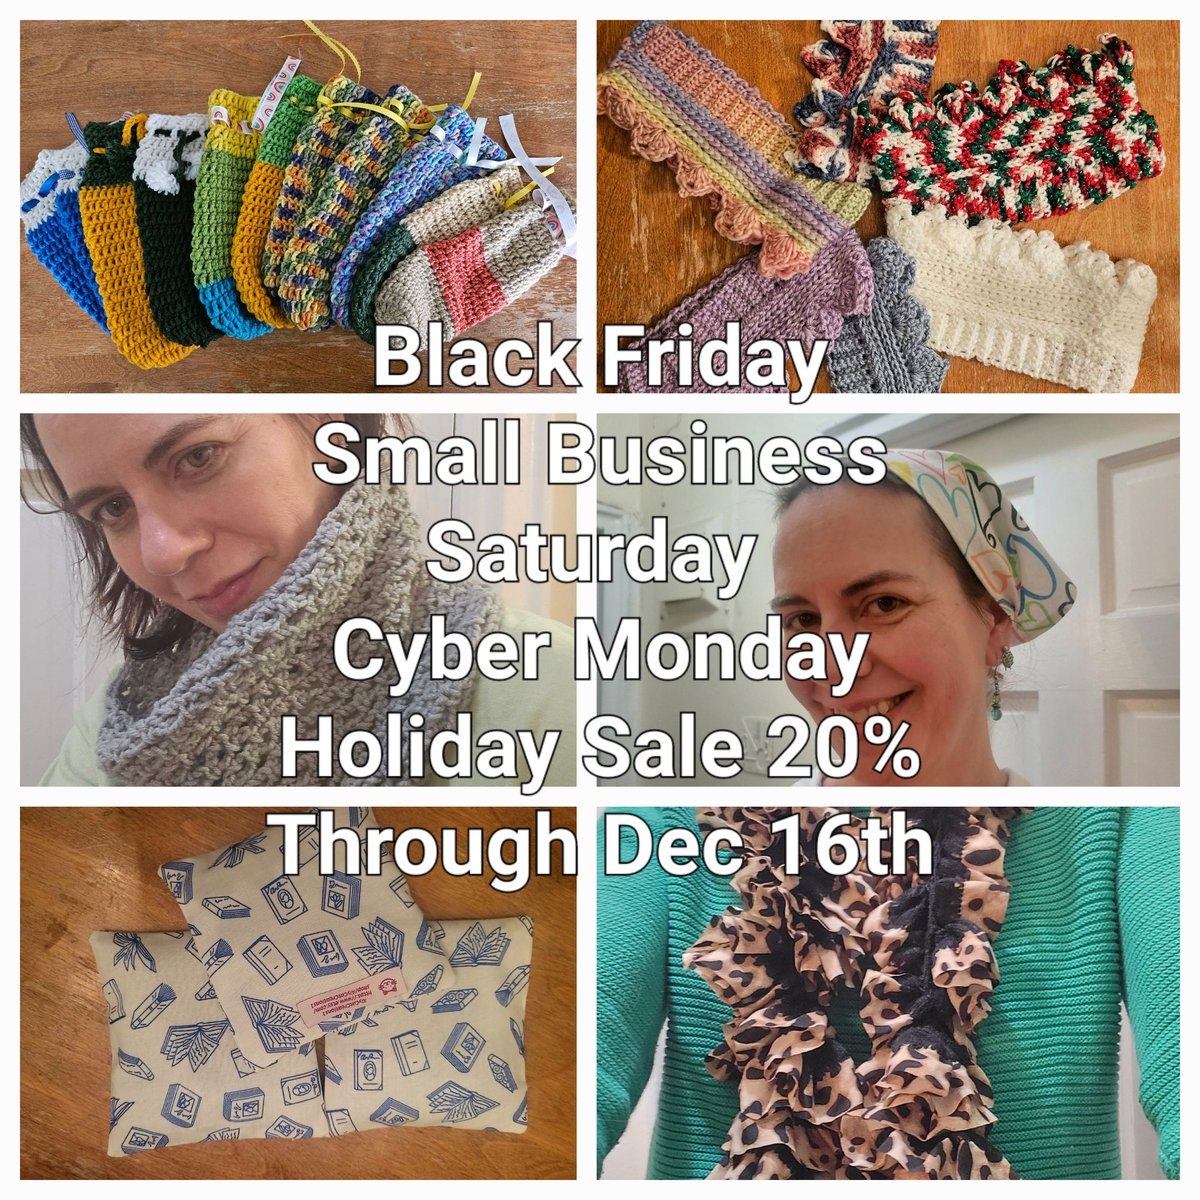 Get your favs before they're gone! #scarf #scarffashion #cowl #headwear #winterstyle #sparkle #etsyshop #etsyfinds #etsyhandmade #fashion #home #kitchen #gifts #smallbusiness #etsygifts #christmas #hannukah #smallbusinesssaturday #stockingstuffers #holidays #hostessgift